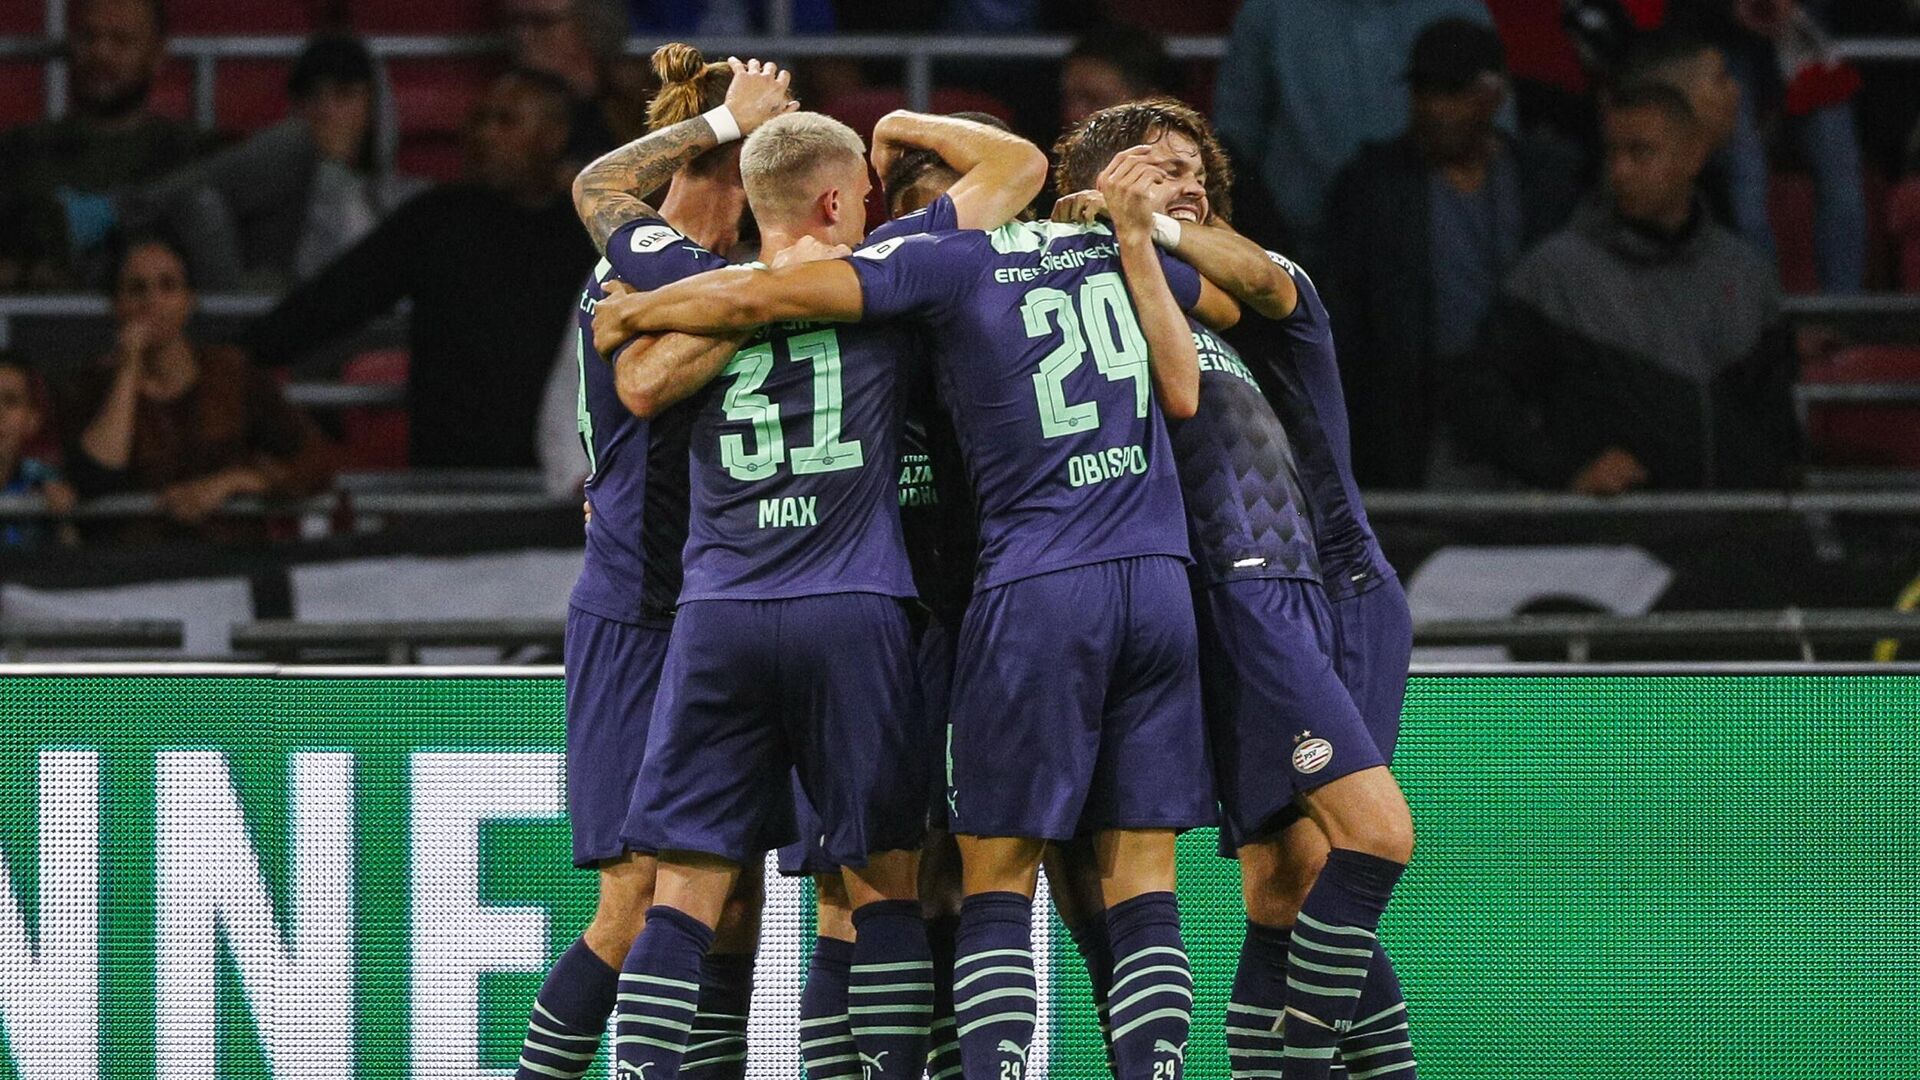 PSV players celebrate the fourth goal of PSV Eindhoven's Mario Gotze during the football Johan Cruyff Shield (Dutch Super Cup) match between Ajax and PSV Eindhoven in the Johan Cruijff Arena in Amsterdam, on August 7, 2021. (Photo by Jeroen Putmans / ANP / AFP) / Netherlands OUT - РИА Новости, 1920, 08.08.2021